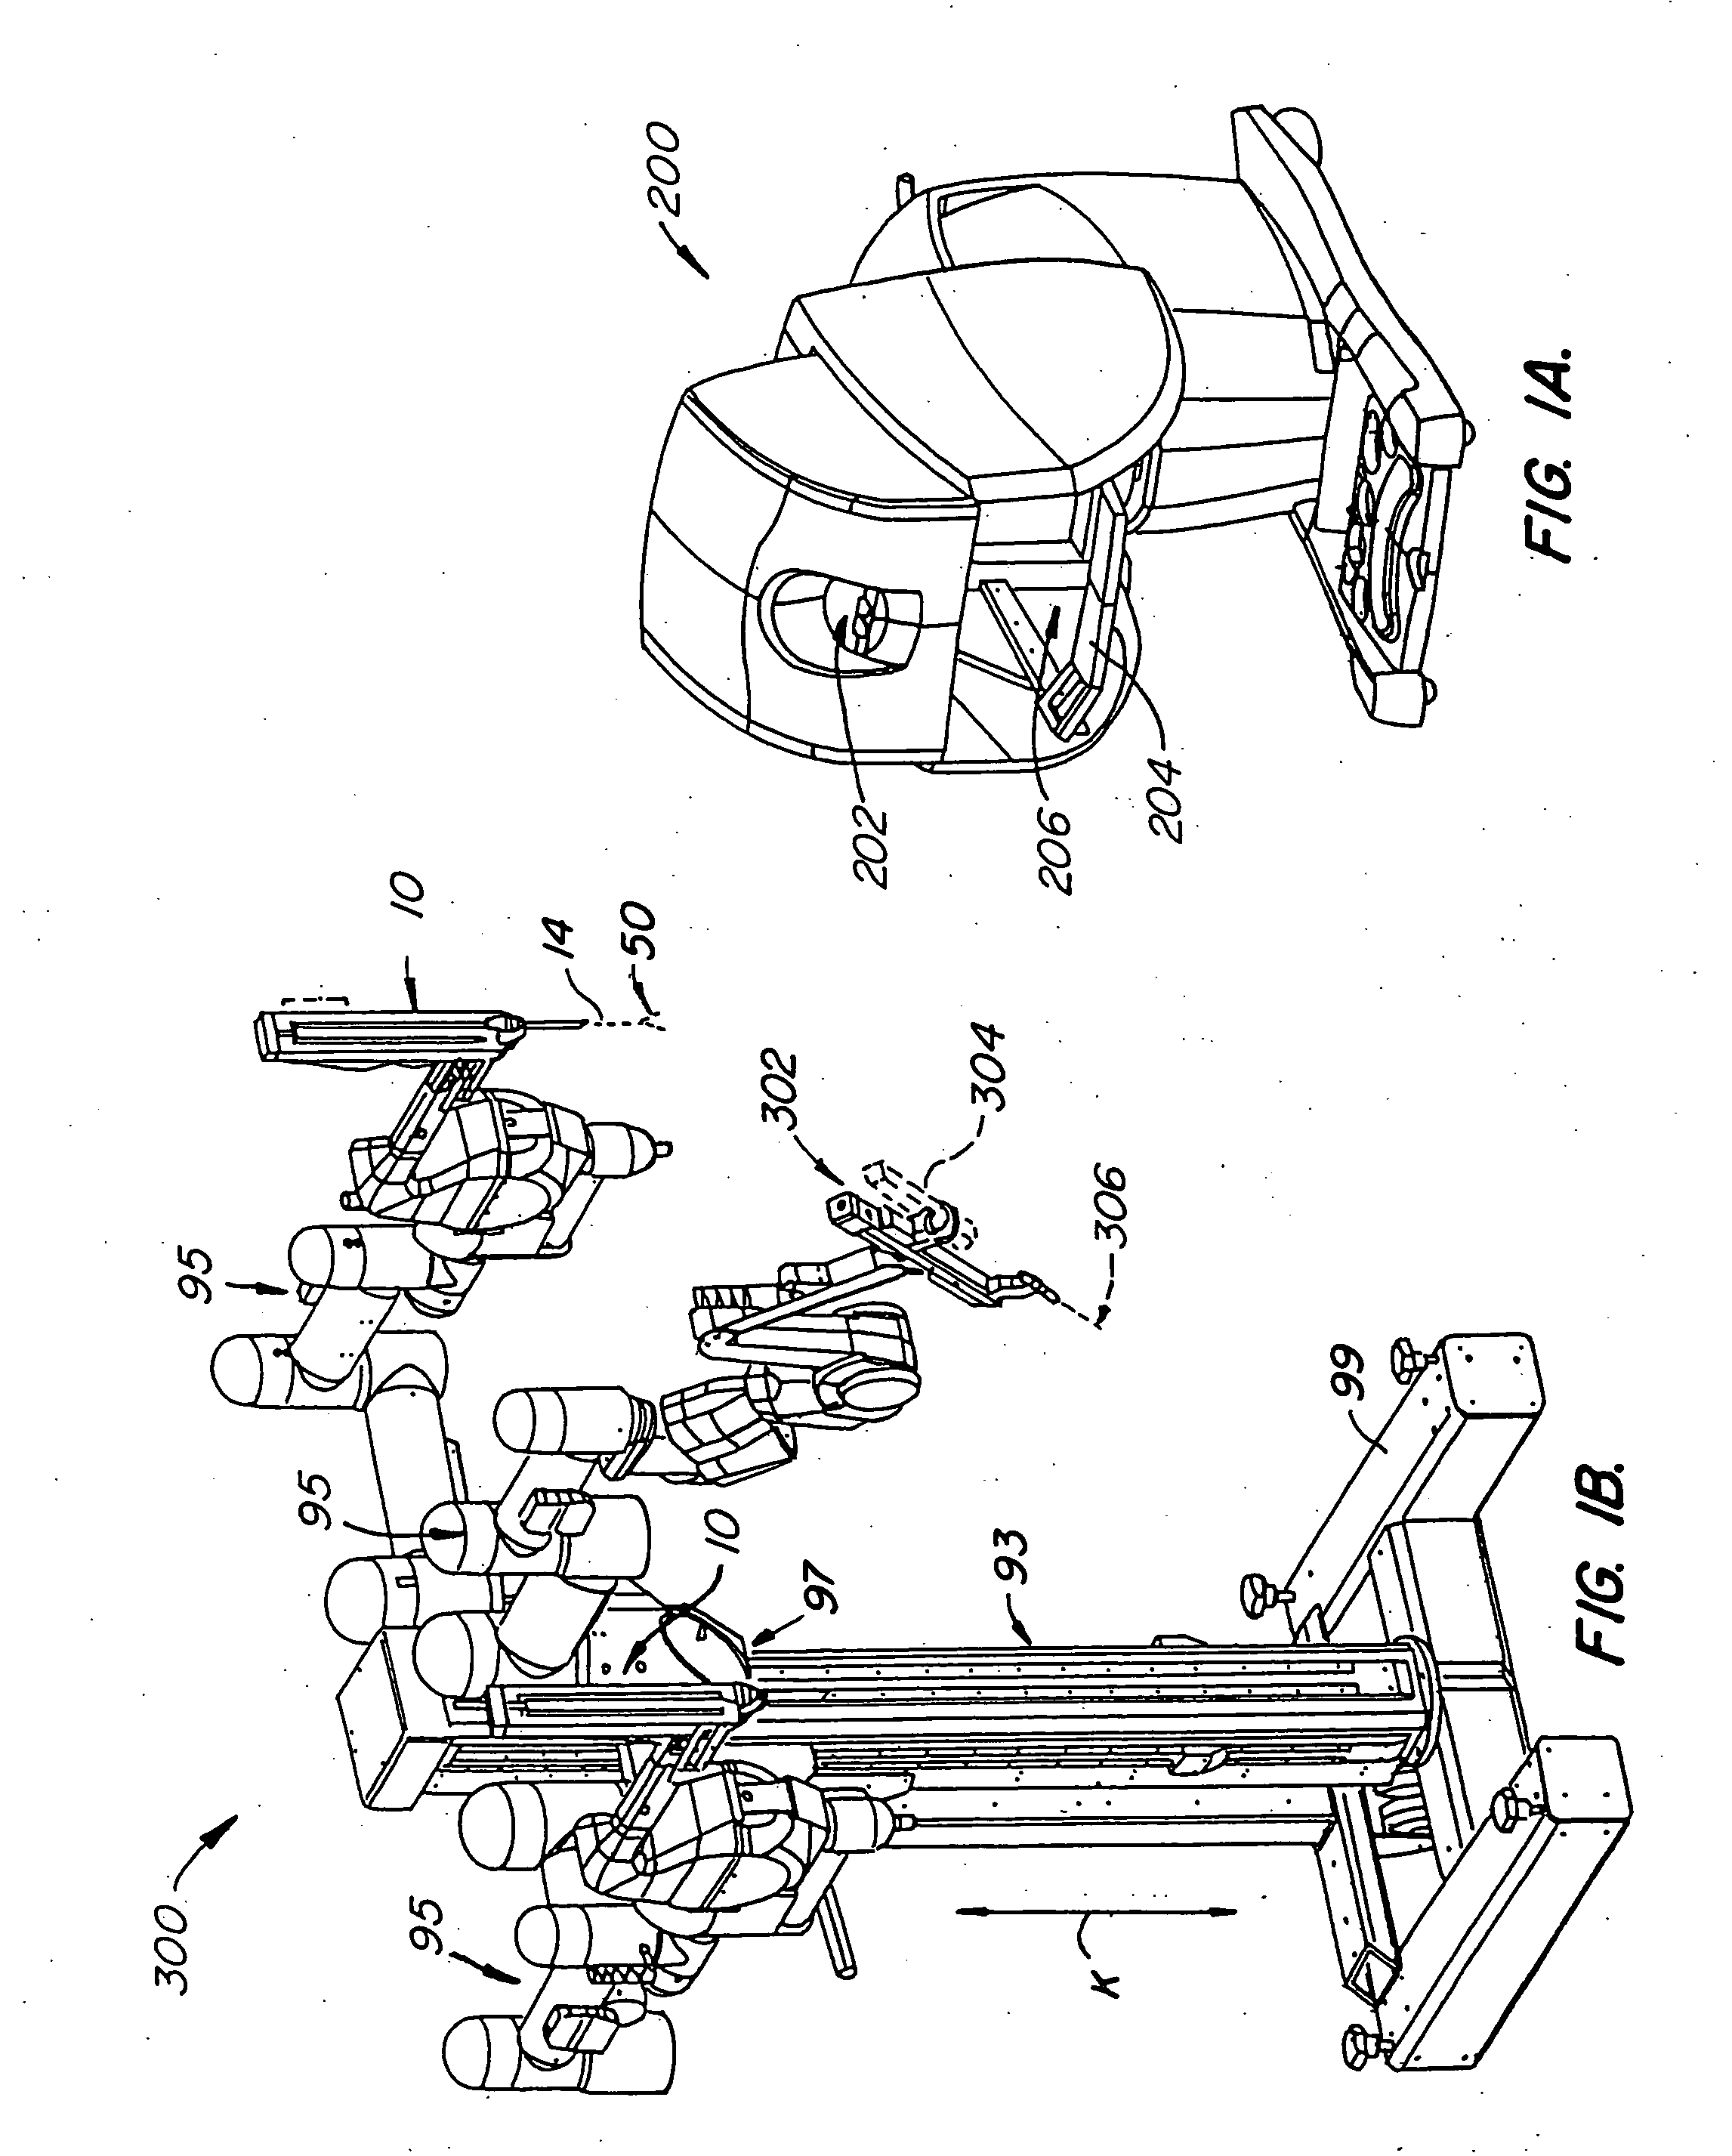 Camera referenced control in a minimally invasive surgical apparatus